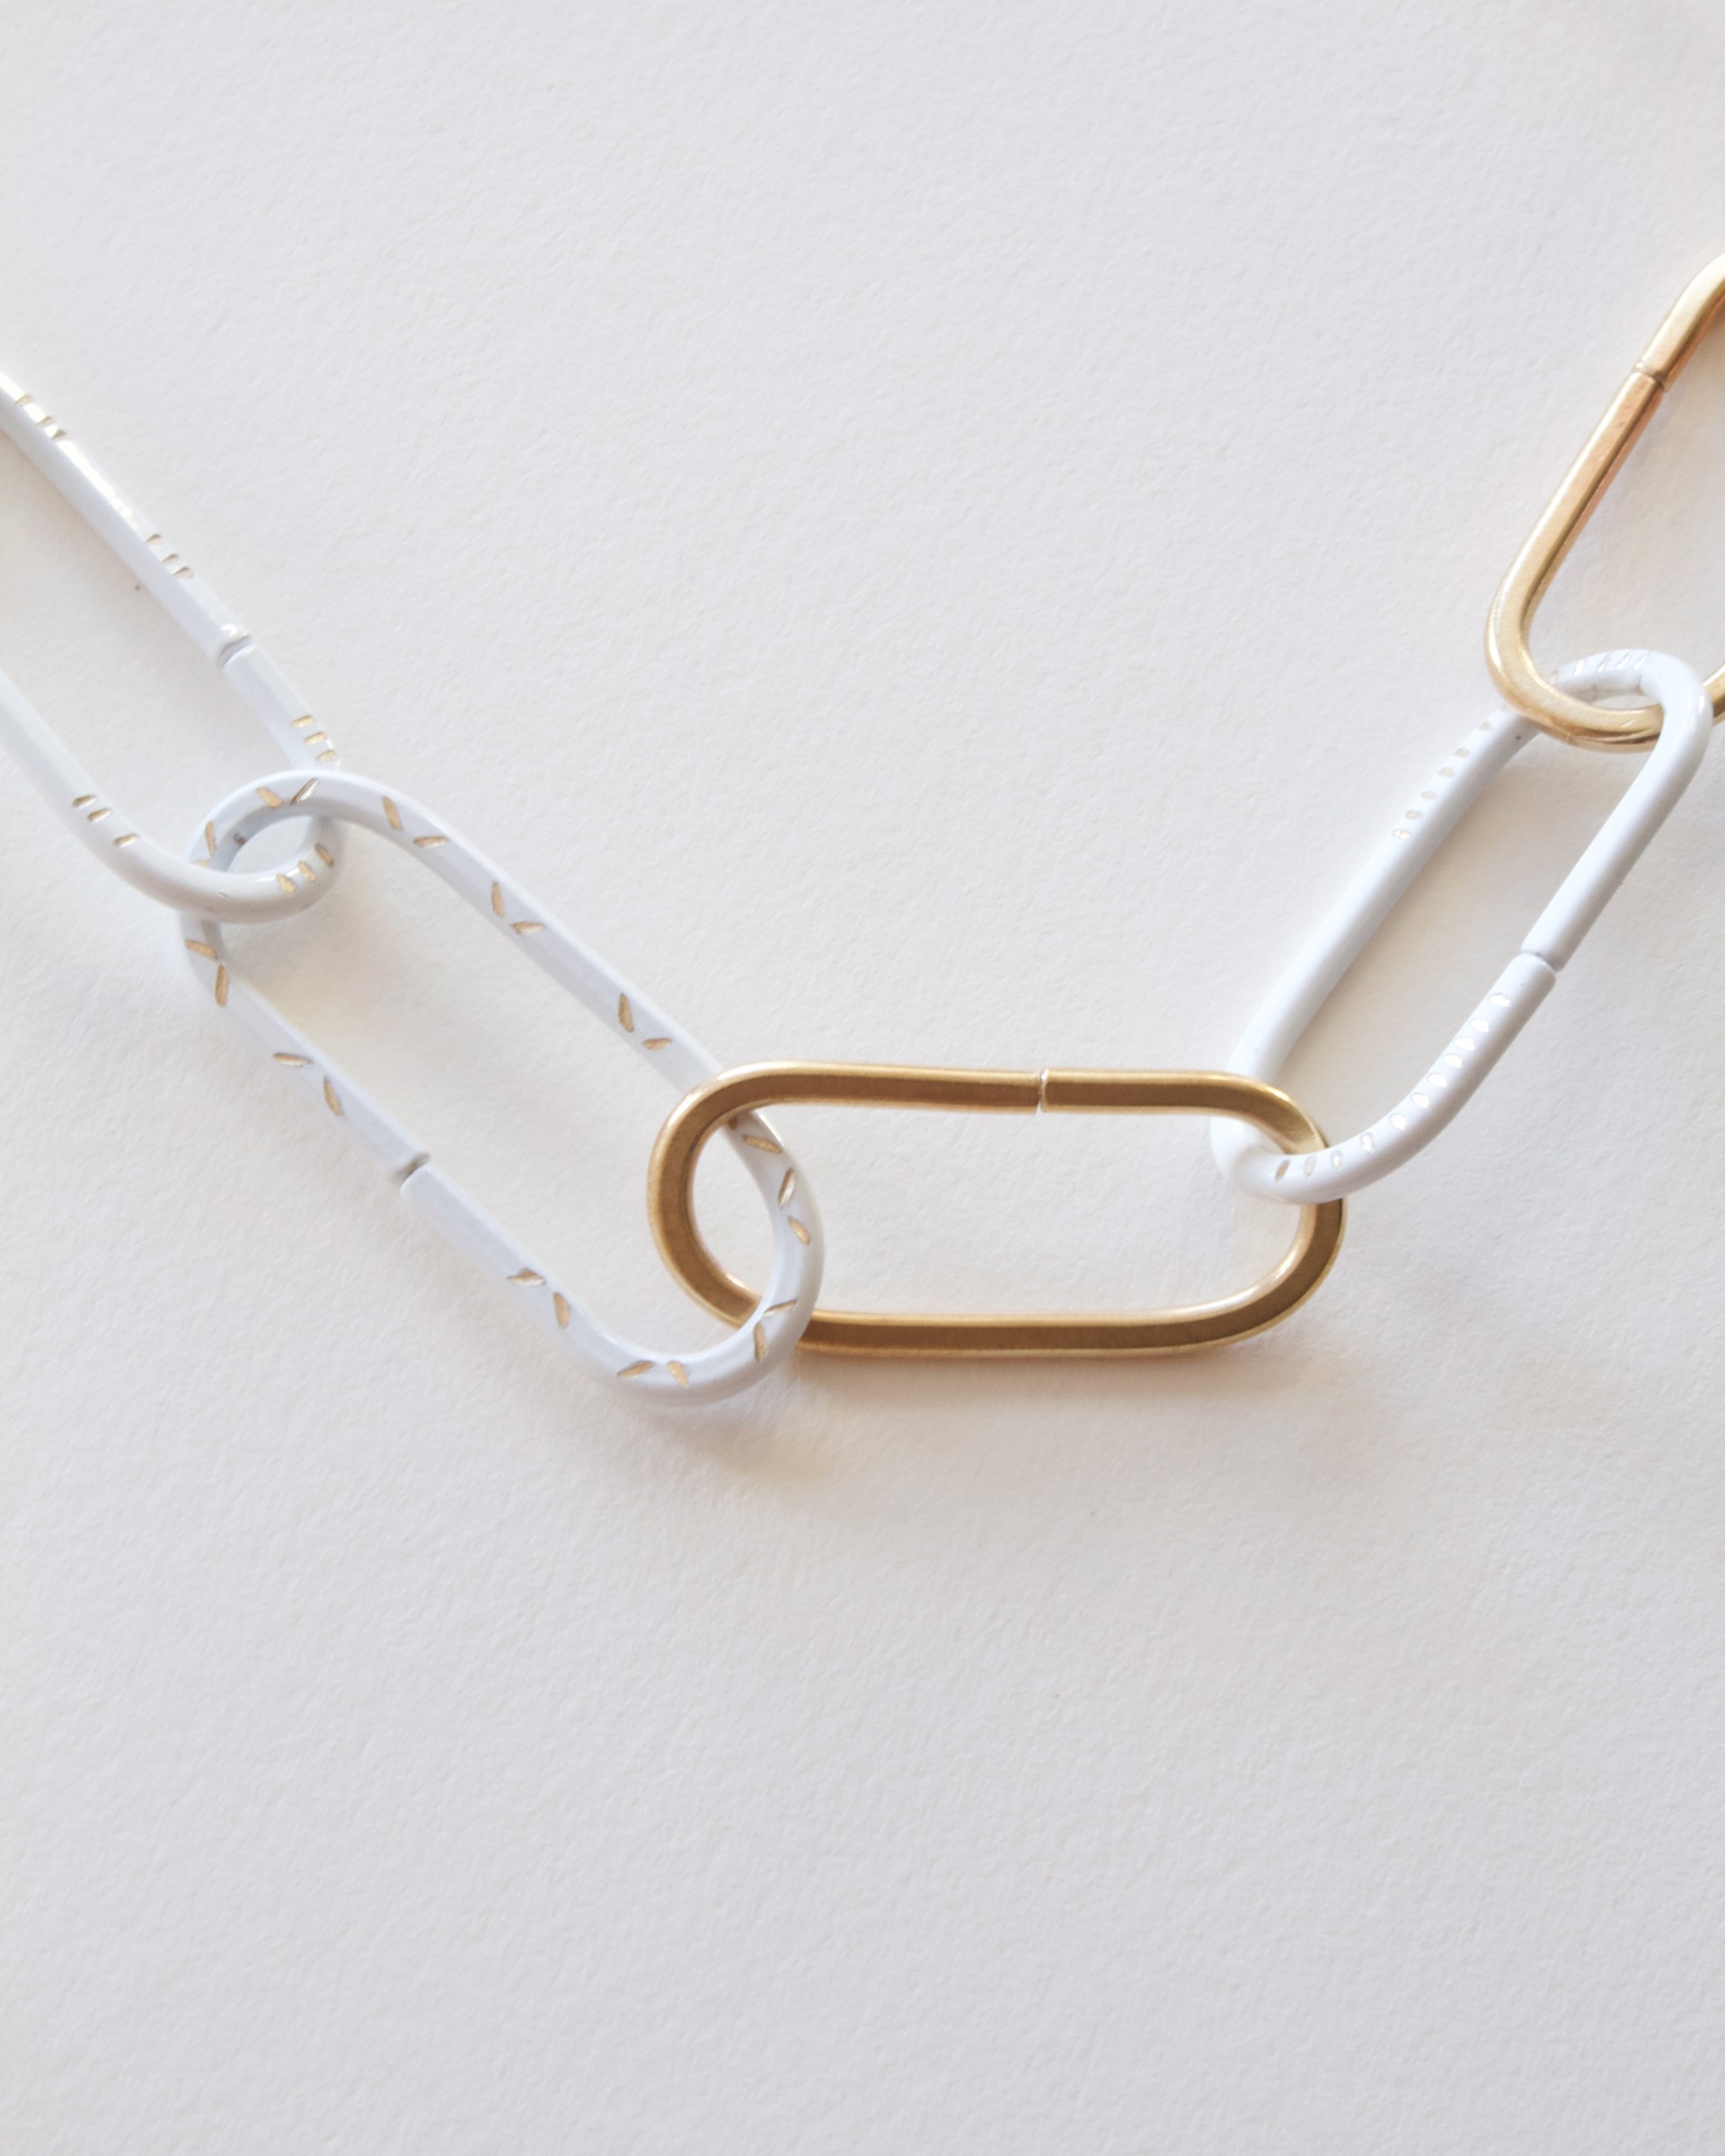 Detail Chain - Brass + White by Audrey Laine